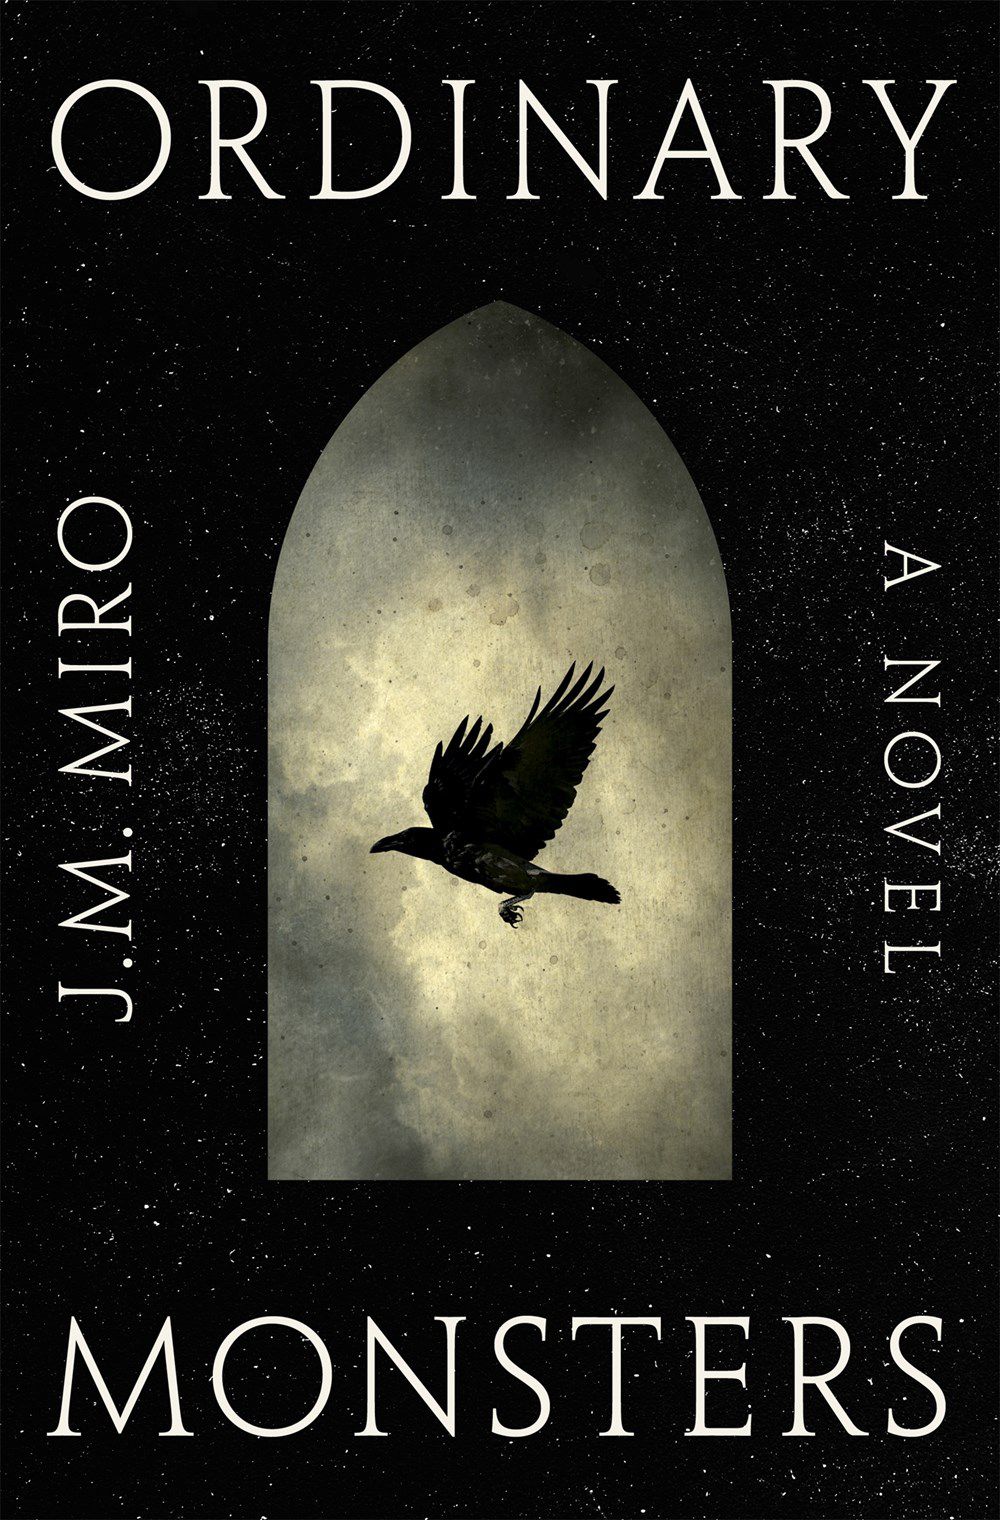 Cover image of Ordinary Monsters by JM Miro, showing a black bird flying against a background of clouds and the night sky.